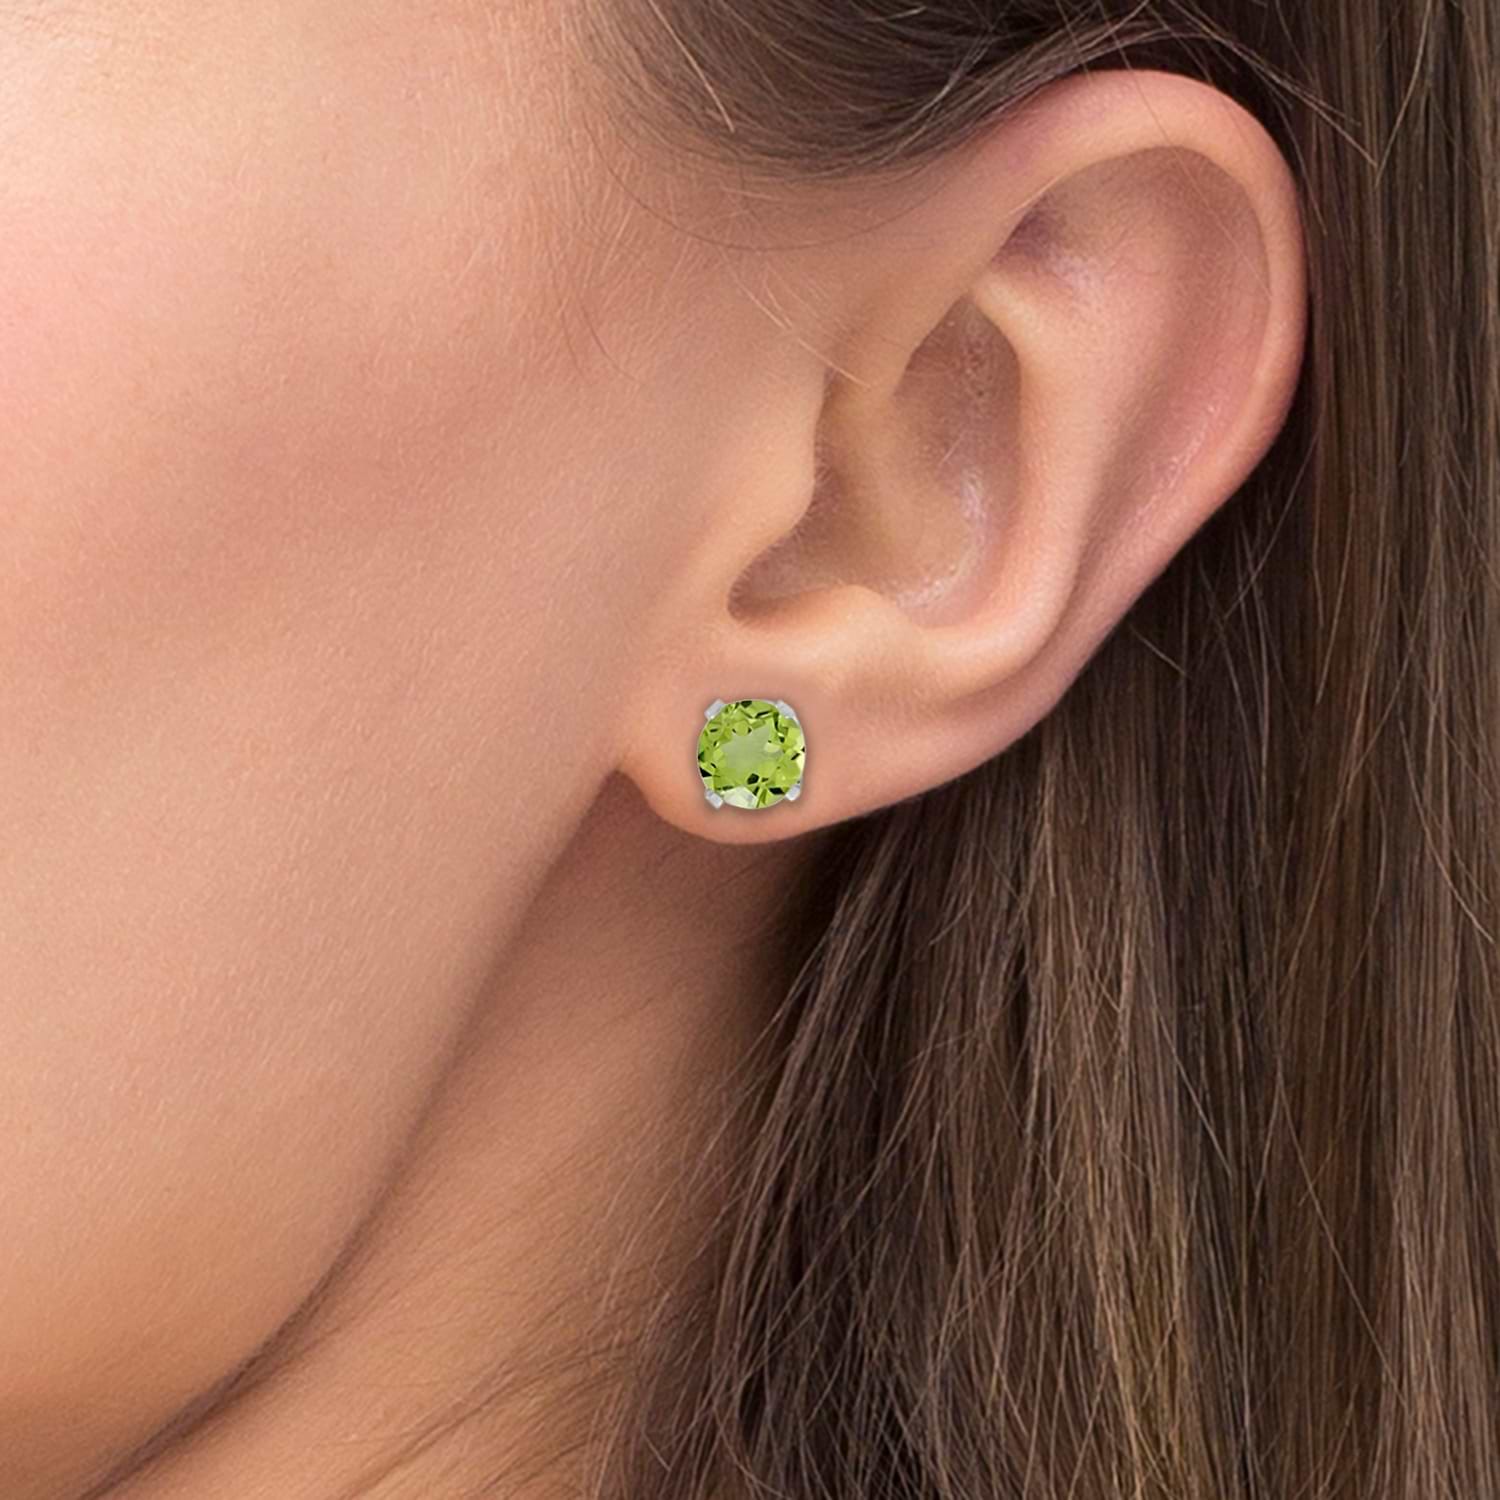 Round Peridot Studs Earrings in 14k White Gold (0.60ct)